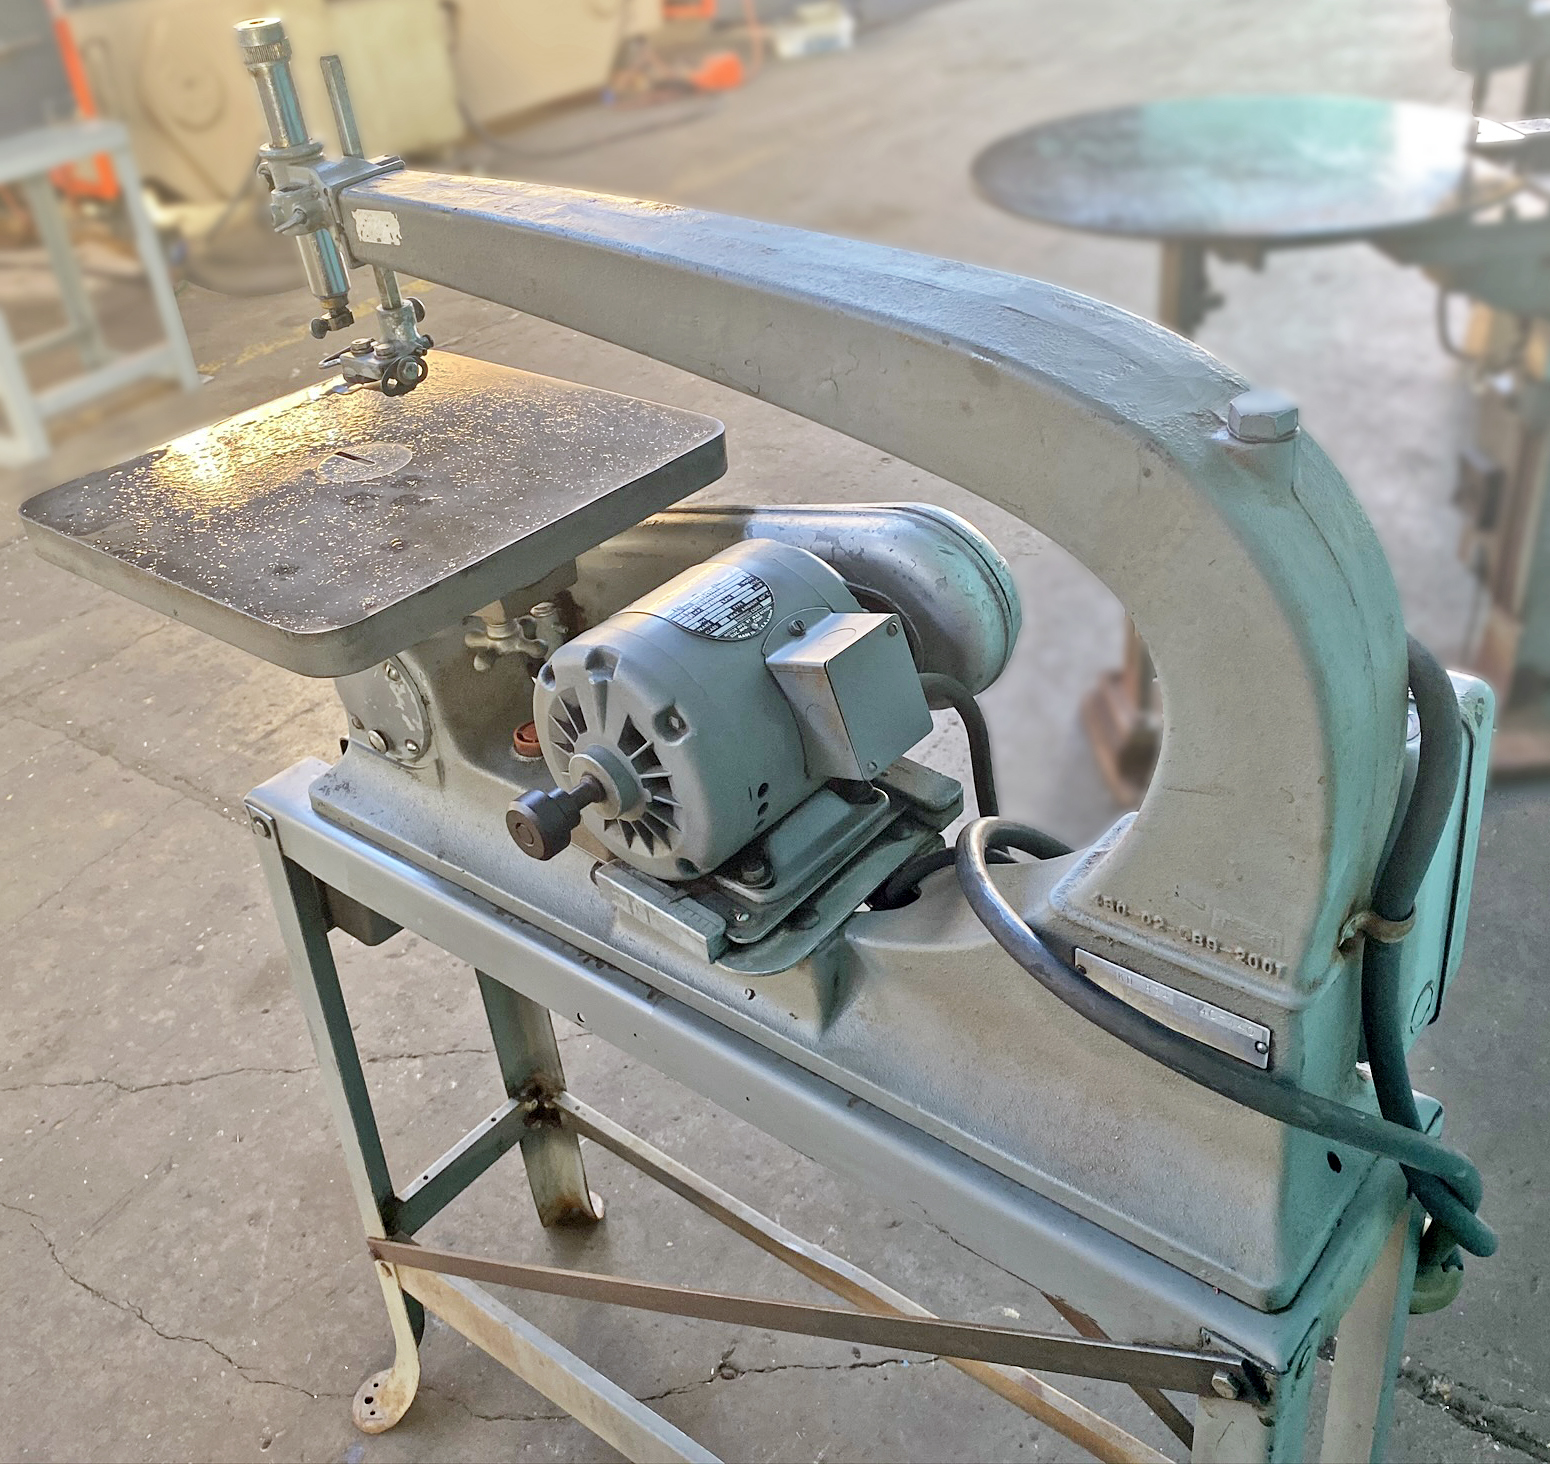 Details about   Vintage 24" Delta Milwaukee Scroll Saw 40-440 Table Tilt Trunnions & Index Scale 